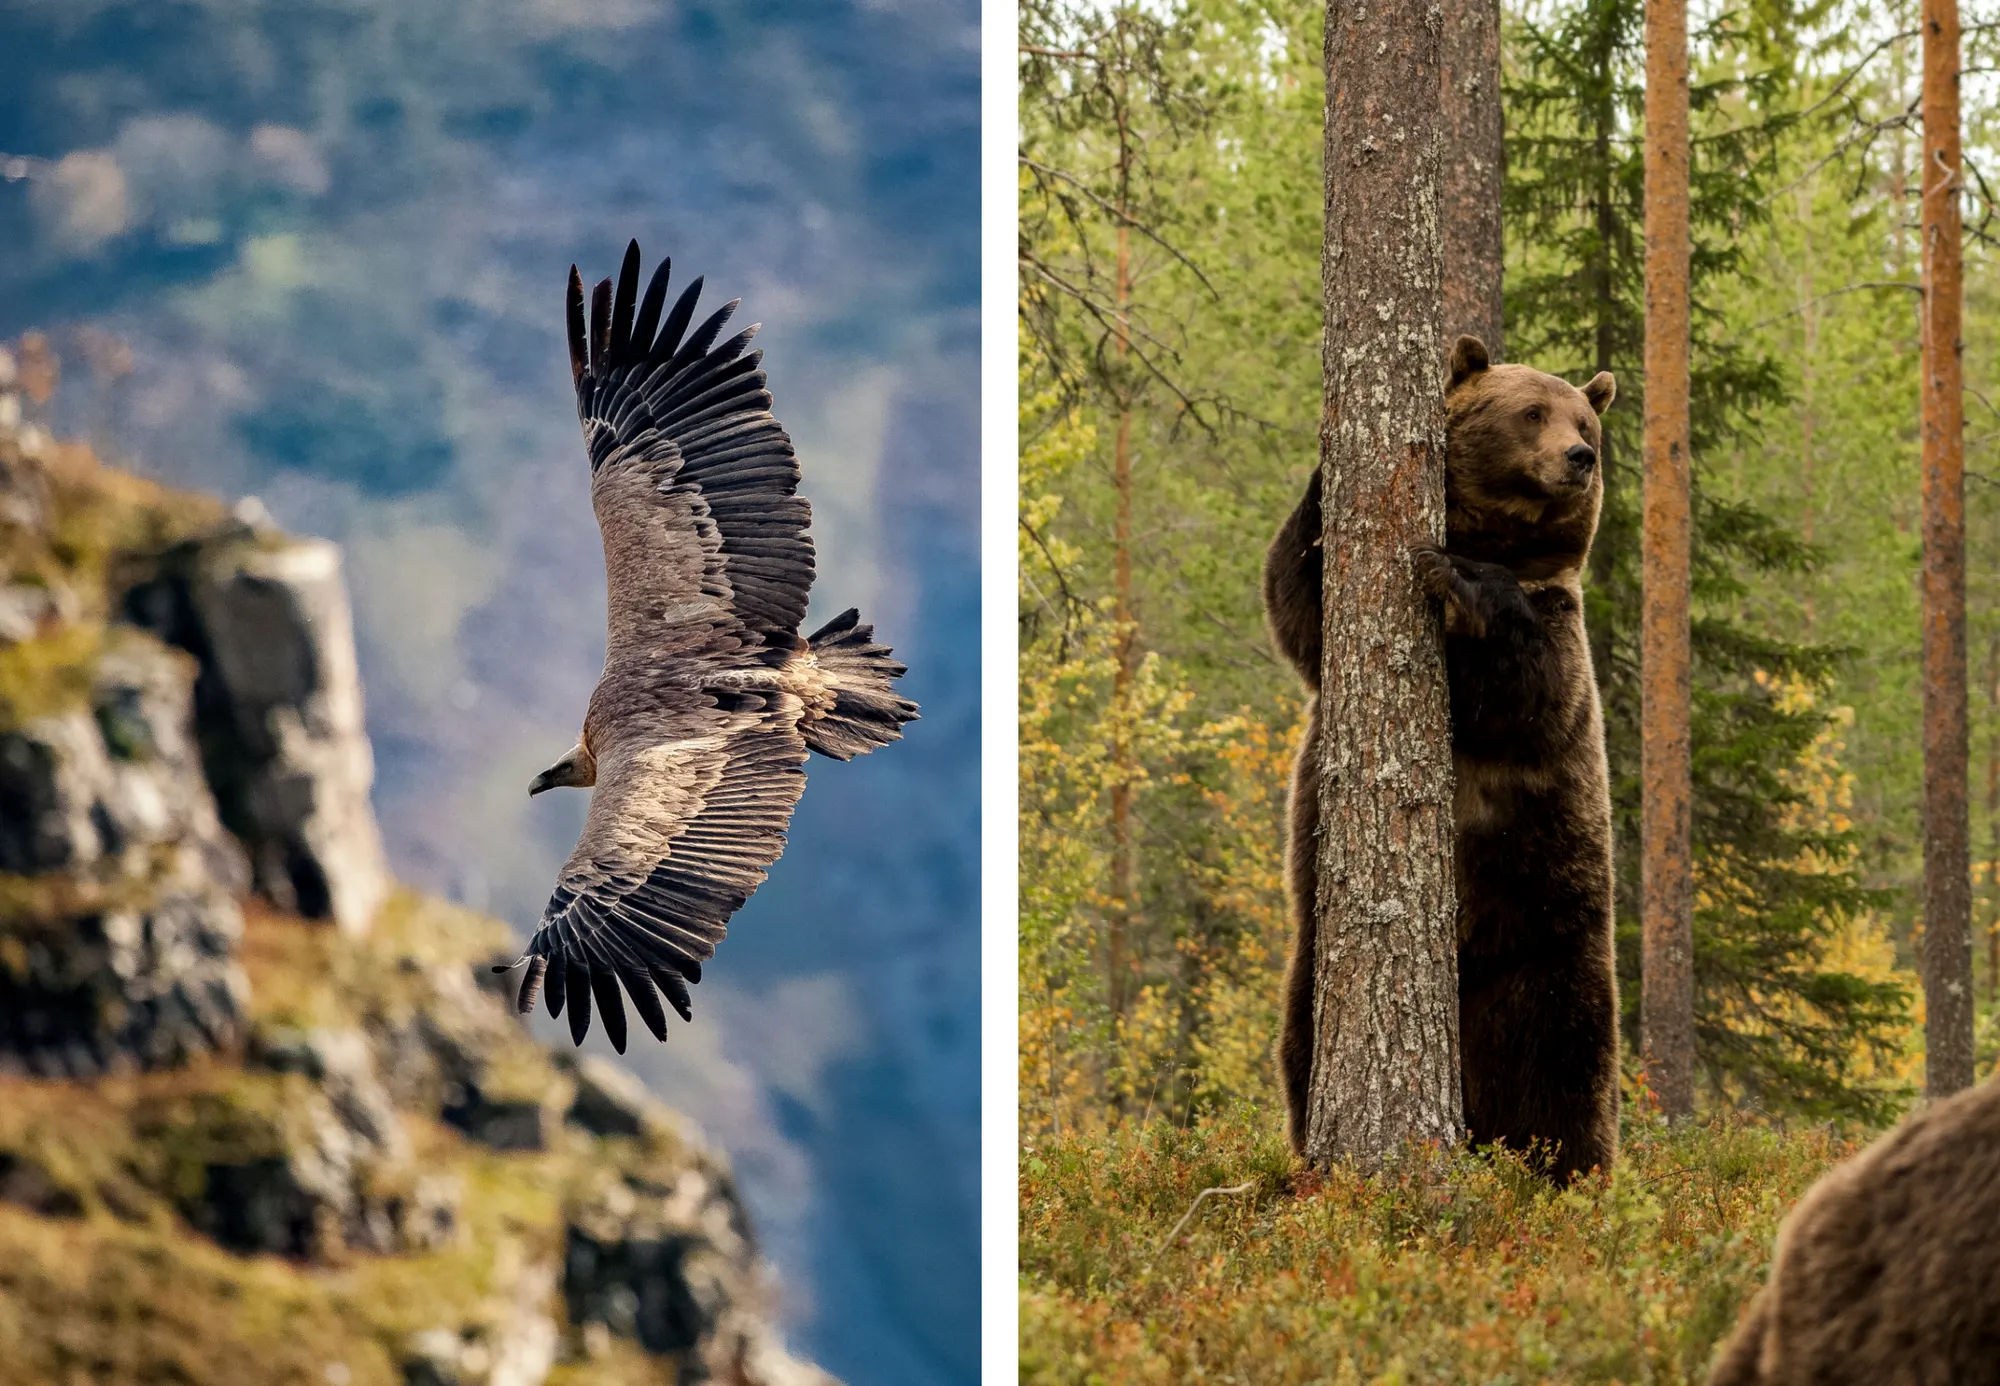 Two images of wildlife by Patrick Masse.